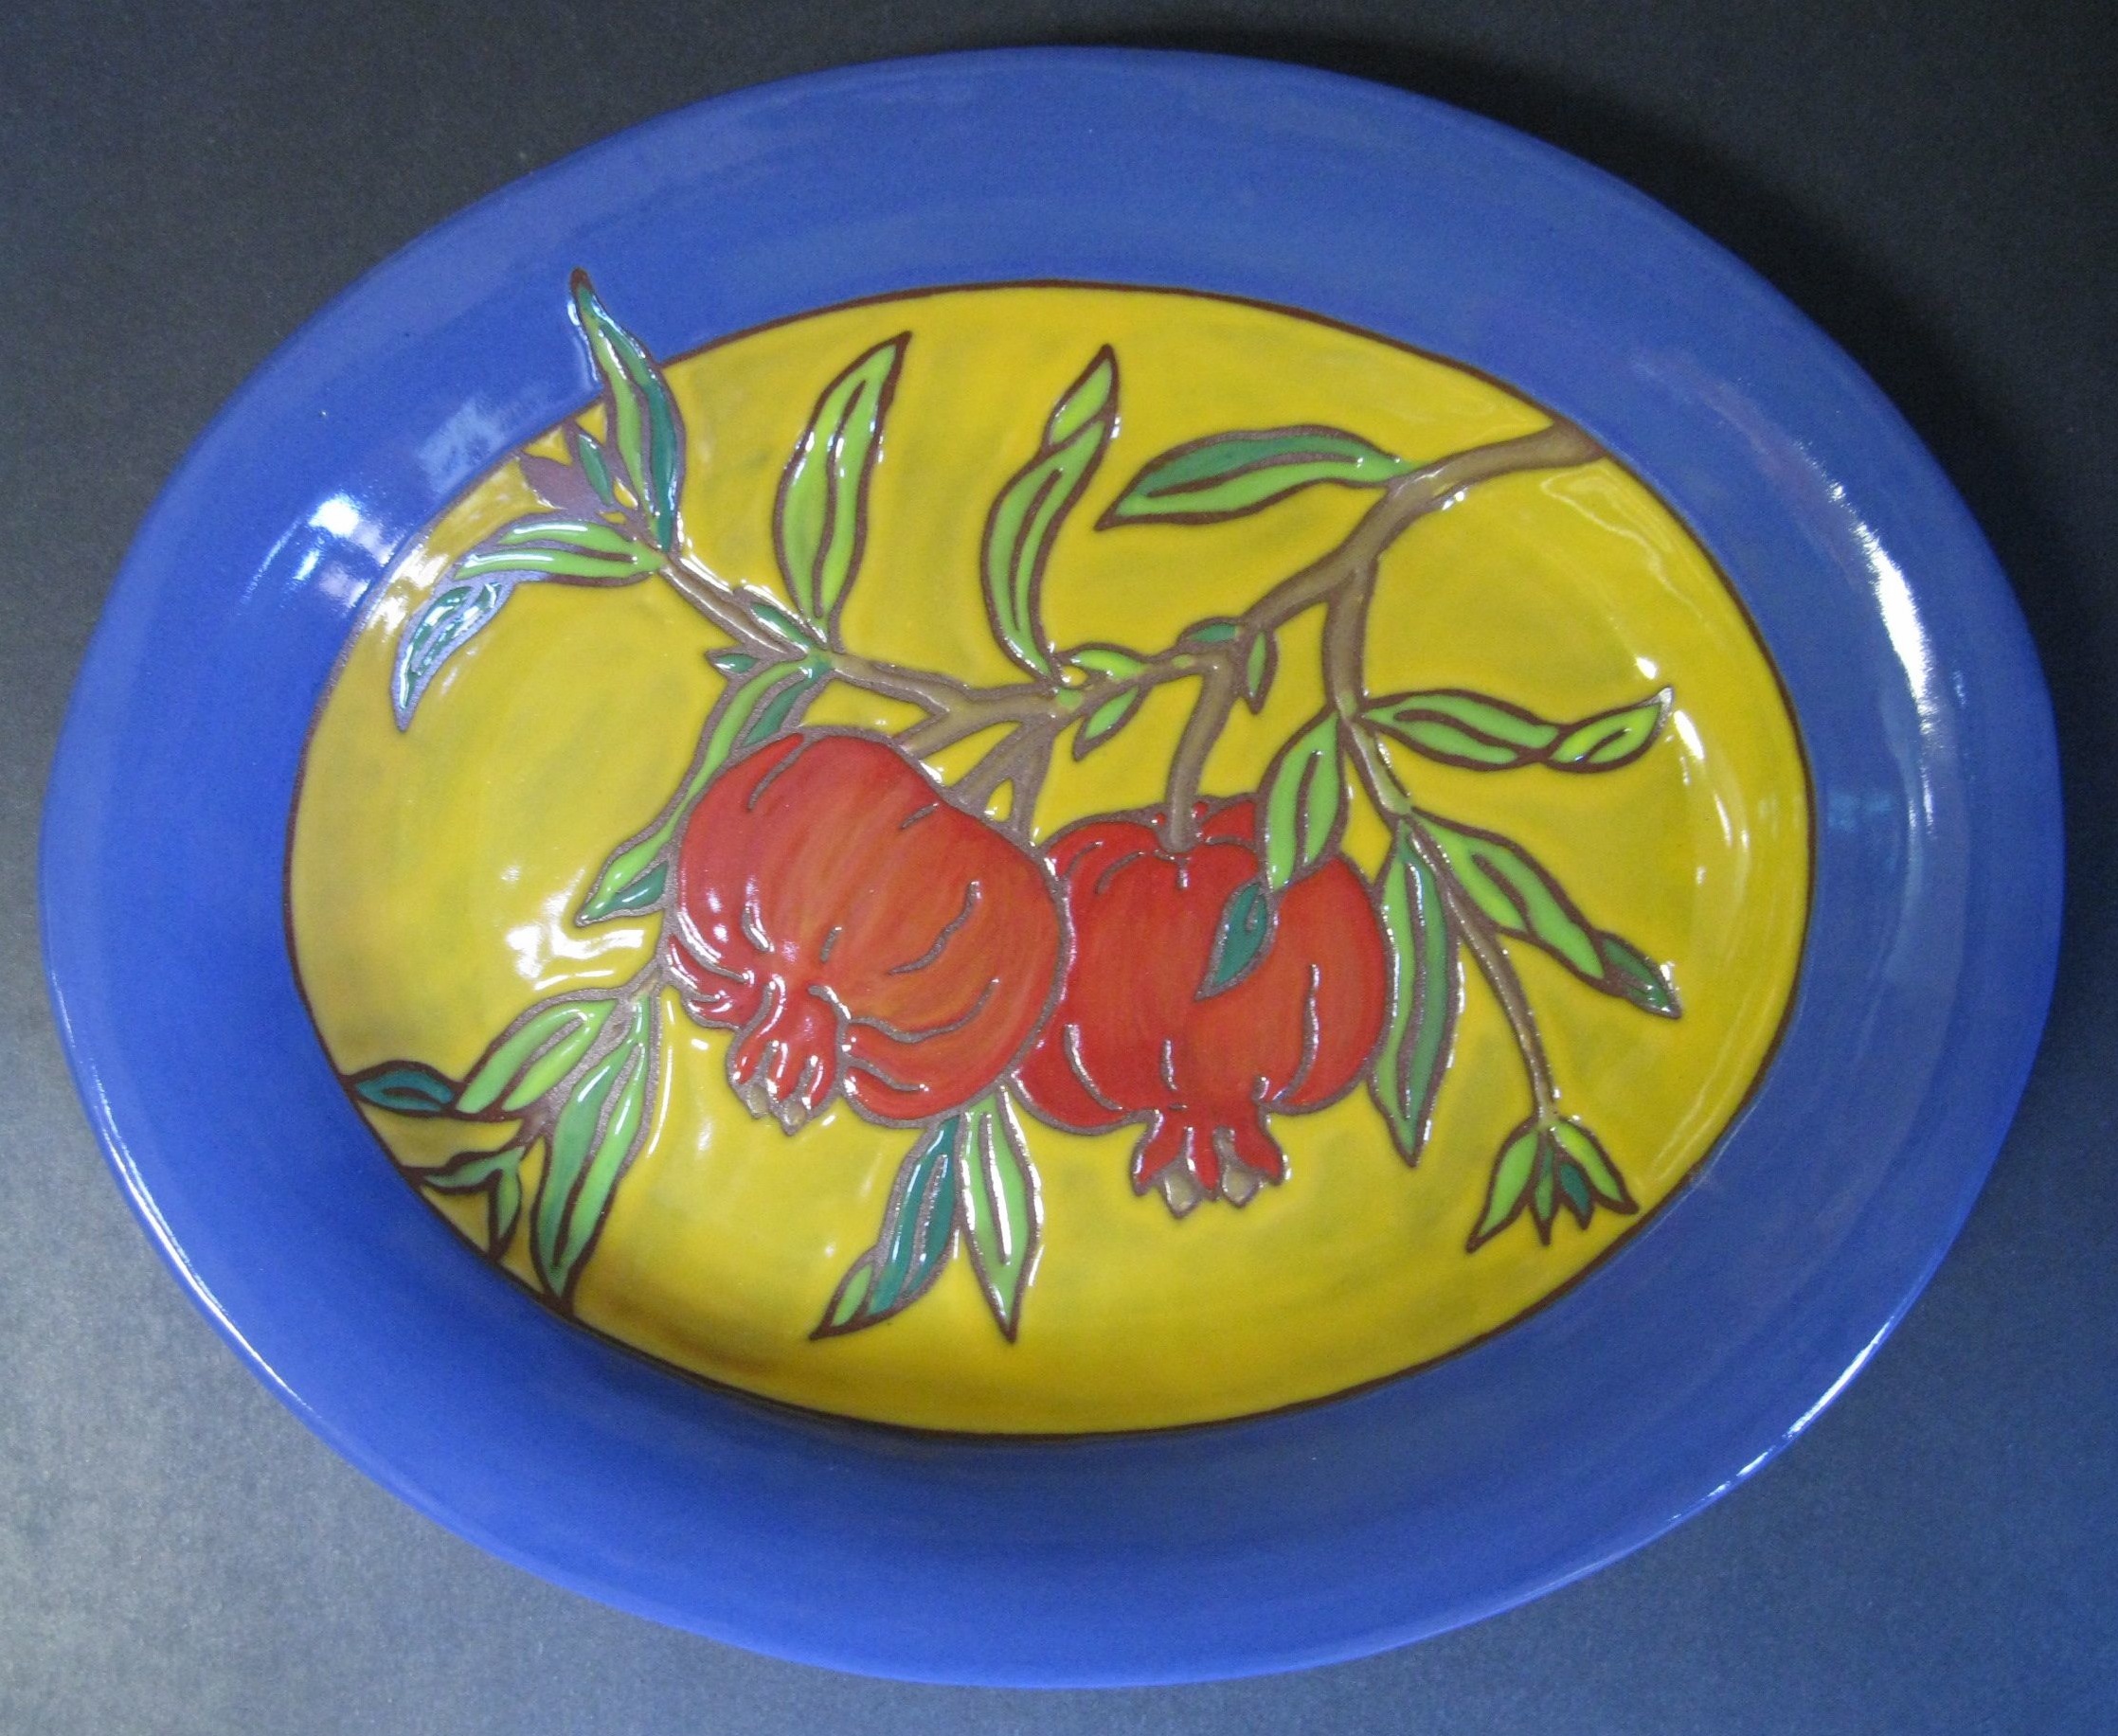 Blue and Yellow Platter with Cuerda Seca Pomegranate Motif